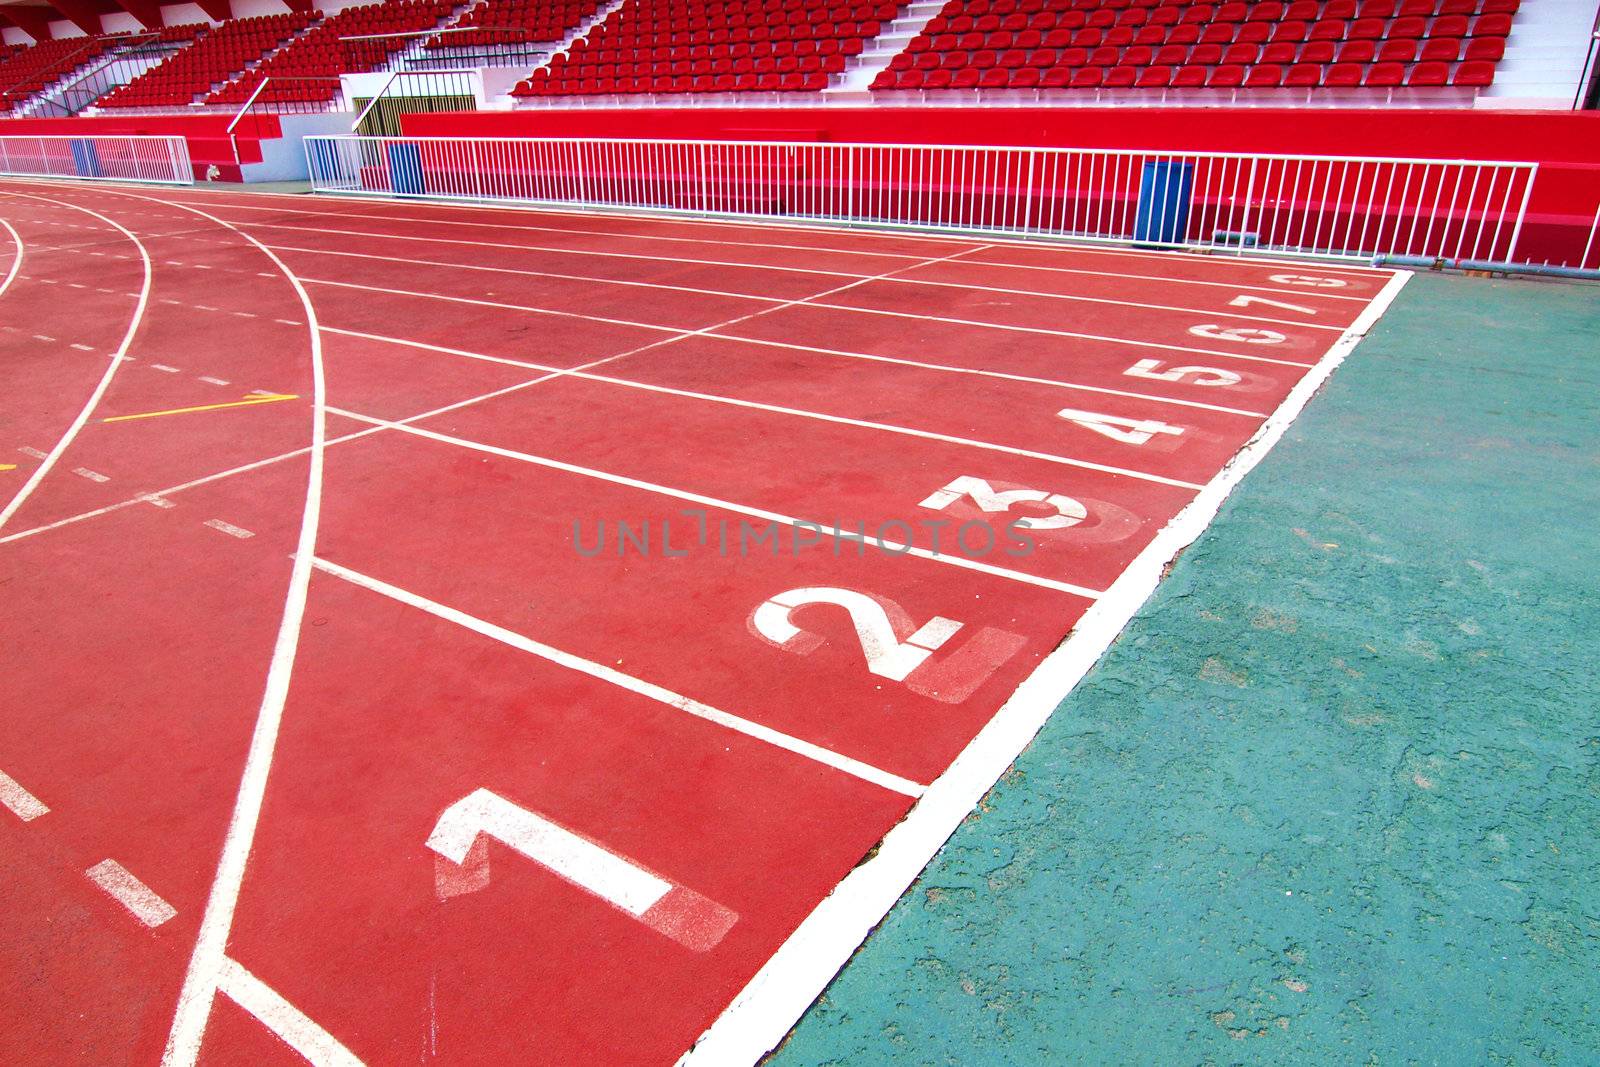 Lanes of a red race track with numbers and red seats in the stadium